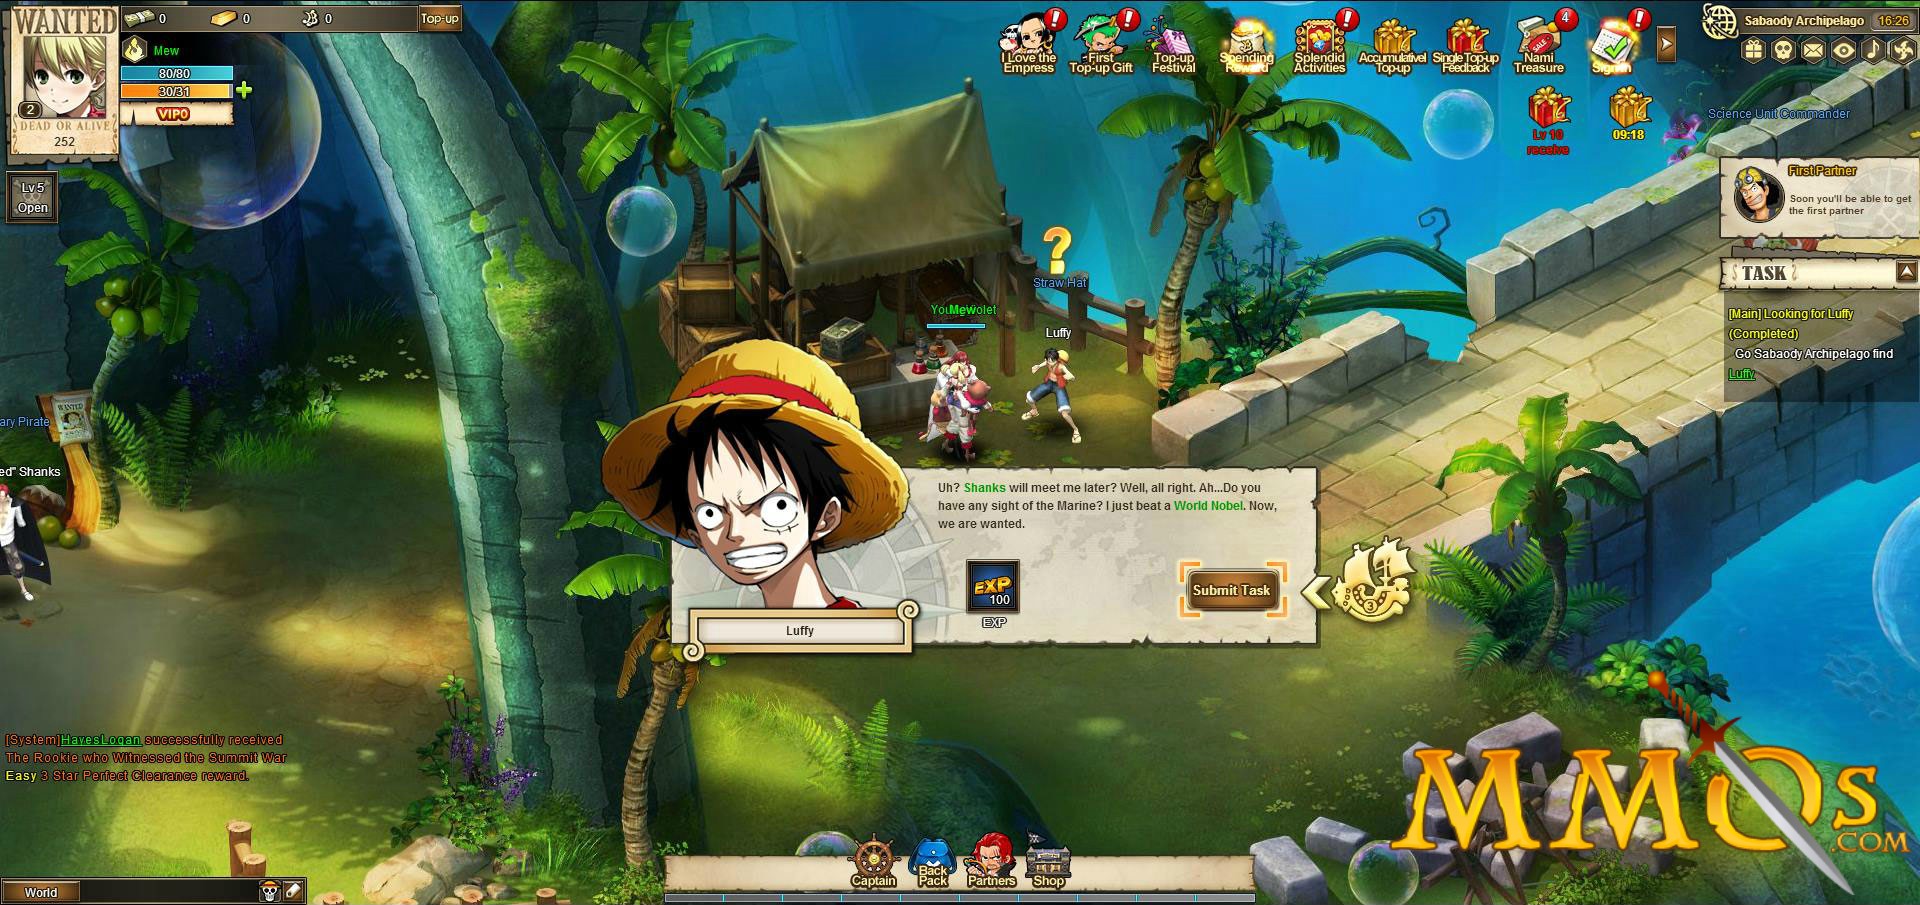 Review of One Piece 2 - Pirate King - MMO & MMORPG Games